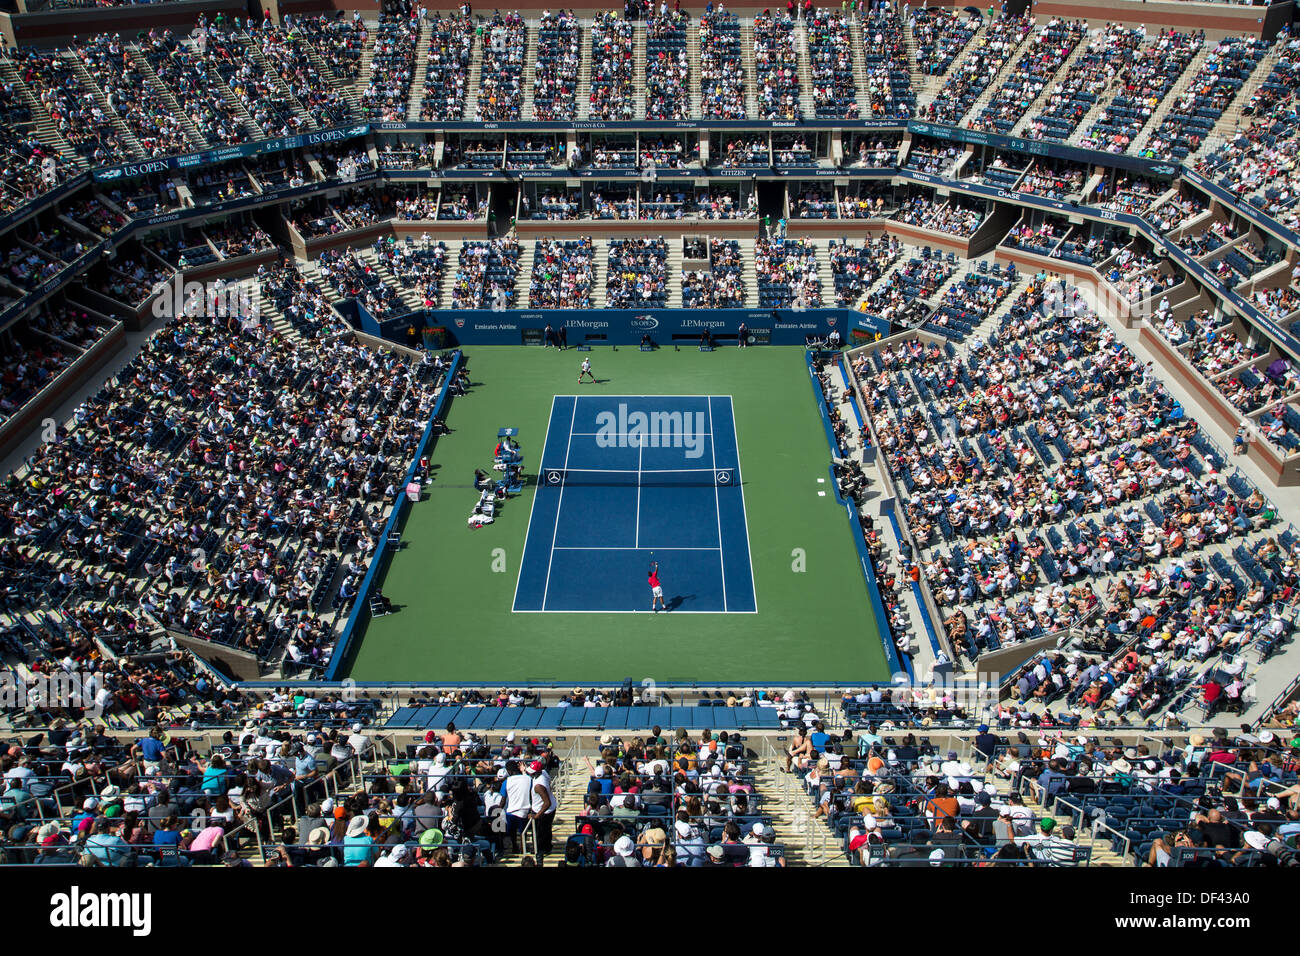 Arthur Ashe Stadium at the Billie Jean King National Tennis Center during the 2013 US Open Tennis Championships Stock Photo